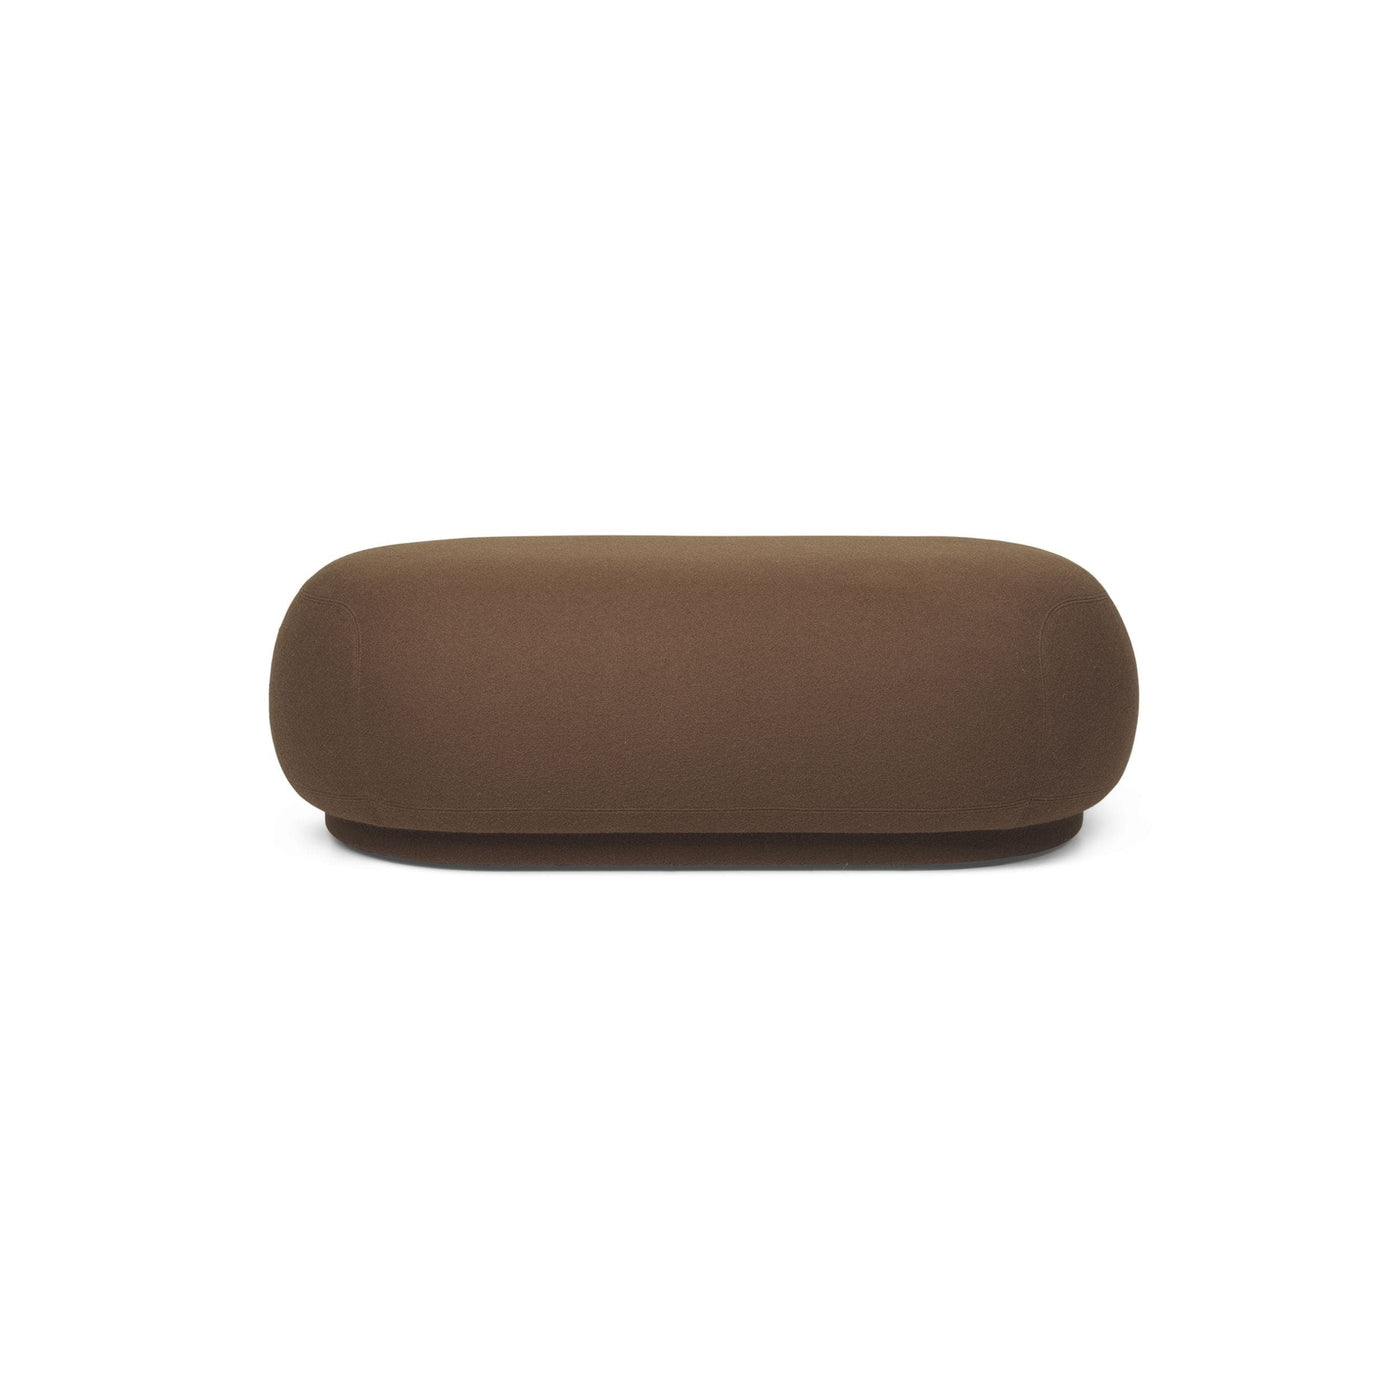 Ferm Living Rico Ottoman in Tonus 364 brown fabric. Made to order from someday designs. #colour_tonus-364